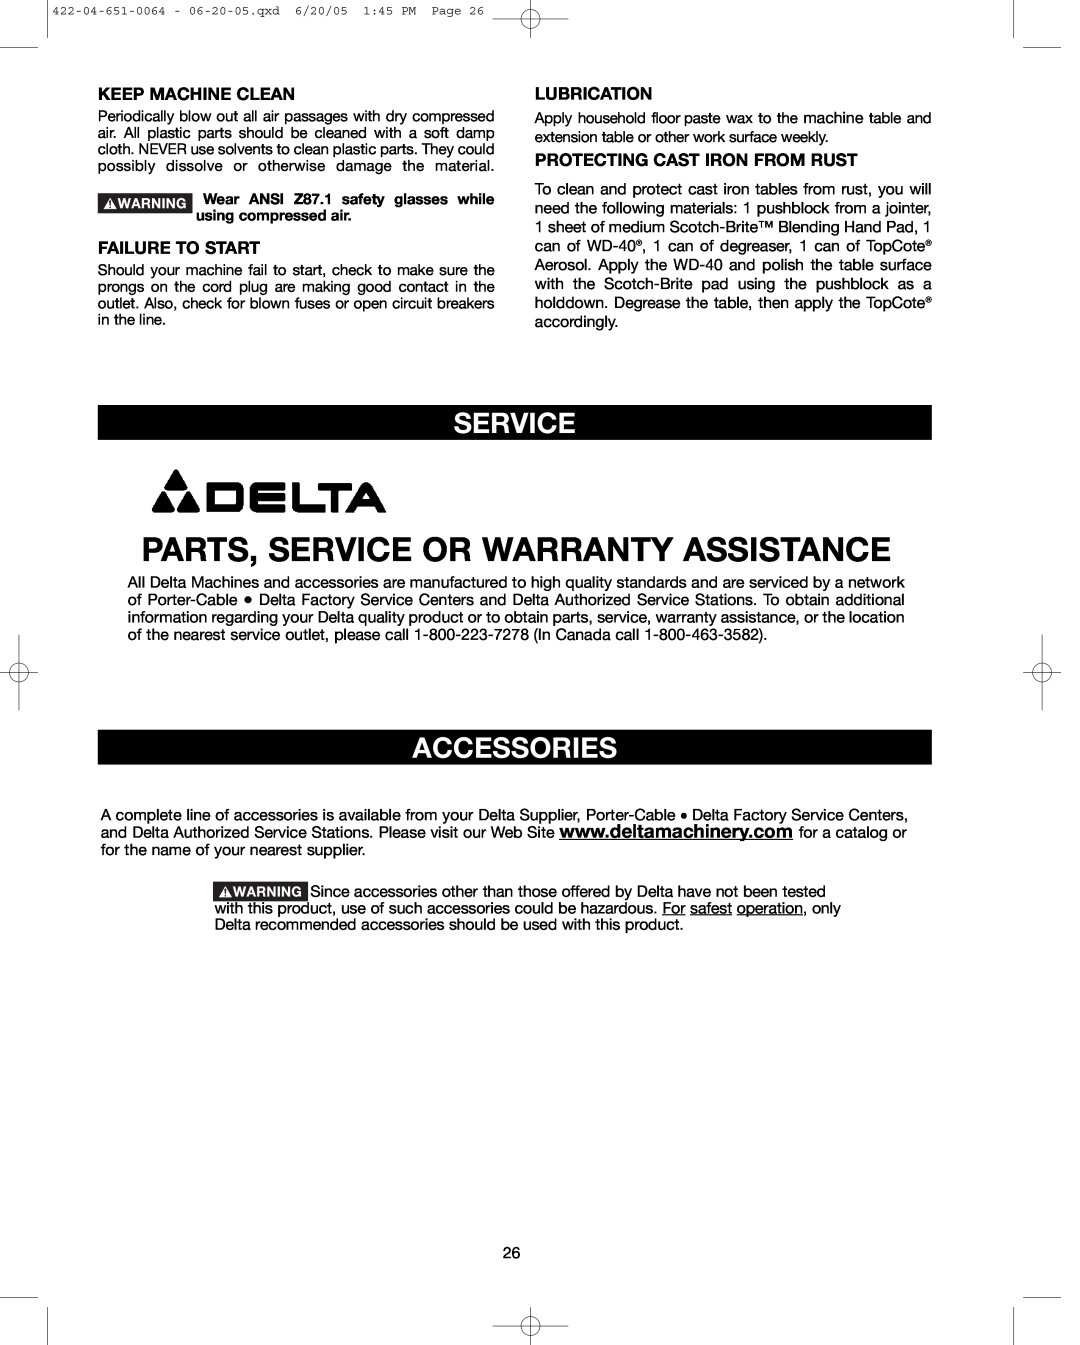 Delta 34-801 Service, Accessories, Keep Machine Clean, Failure To Start, Lubrication, Protecting Cast Iron From Rust 